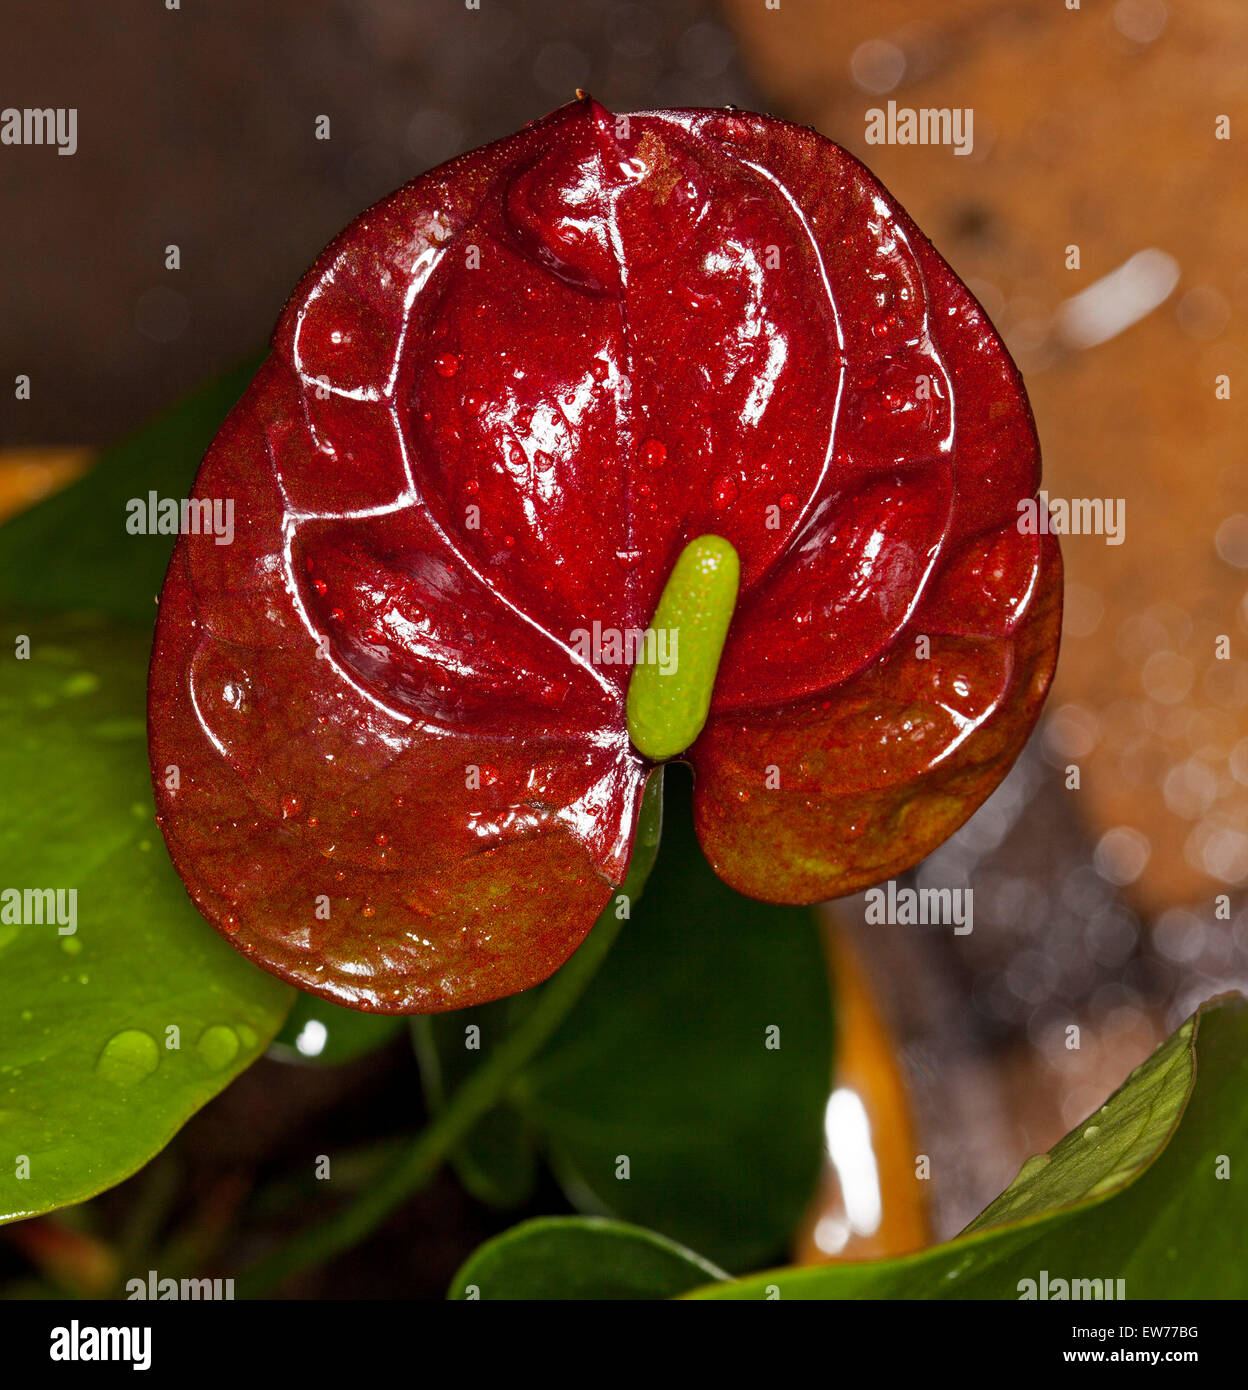 Dark red / brown spathe and green spadix of Anthurium andreanum 'Deco Chocolate'' on background of dark green foliage Stock Photo